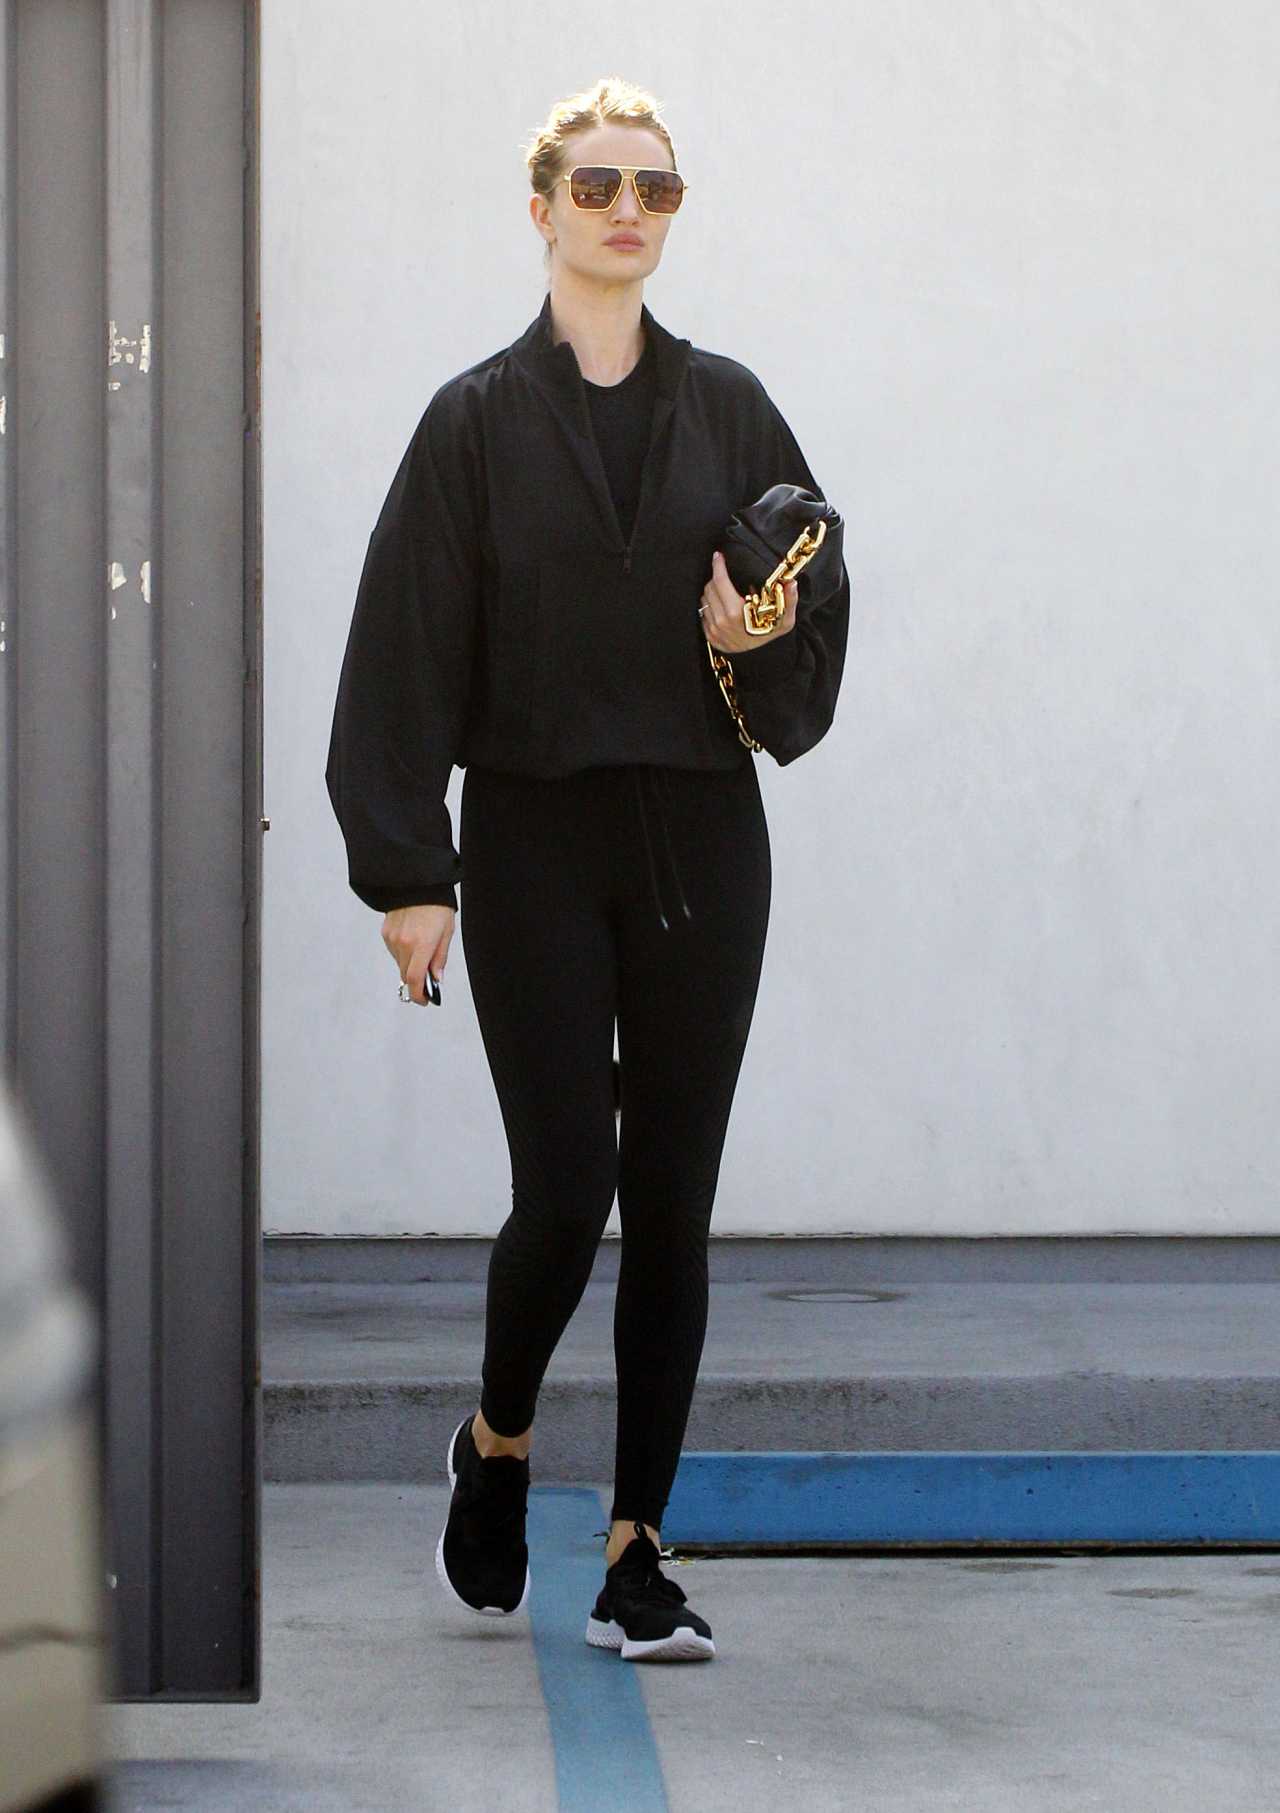 Rosie Huntington-Whiteley 2020 : Rosie Huntington-Whiteley – Exiting a Gym After A Workout in Los Angeles-09